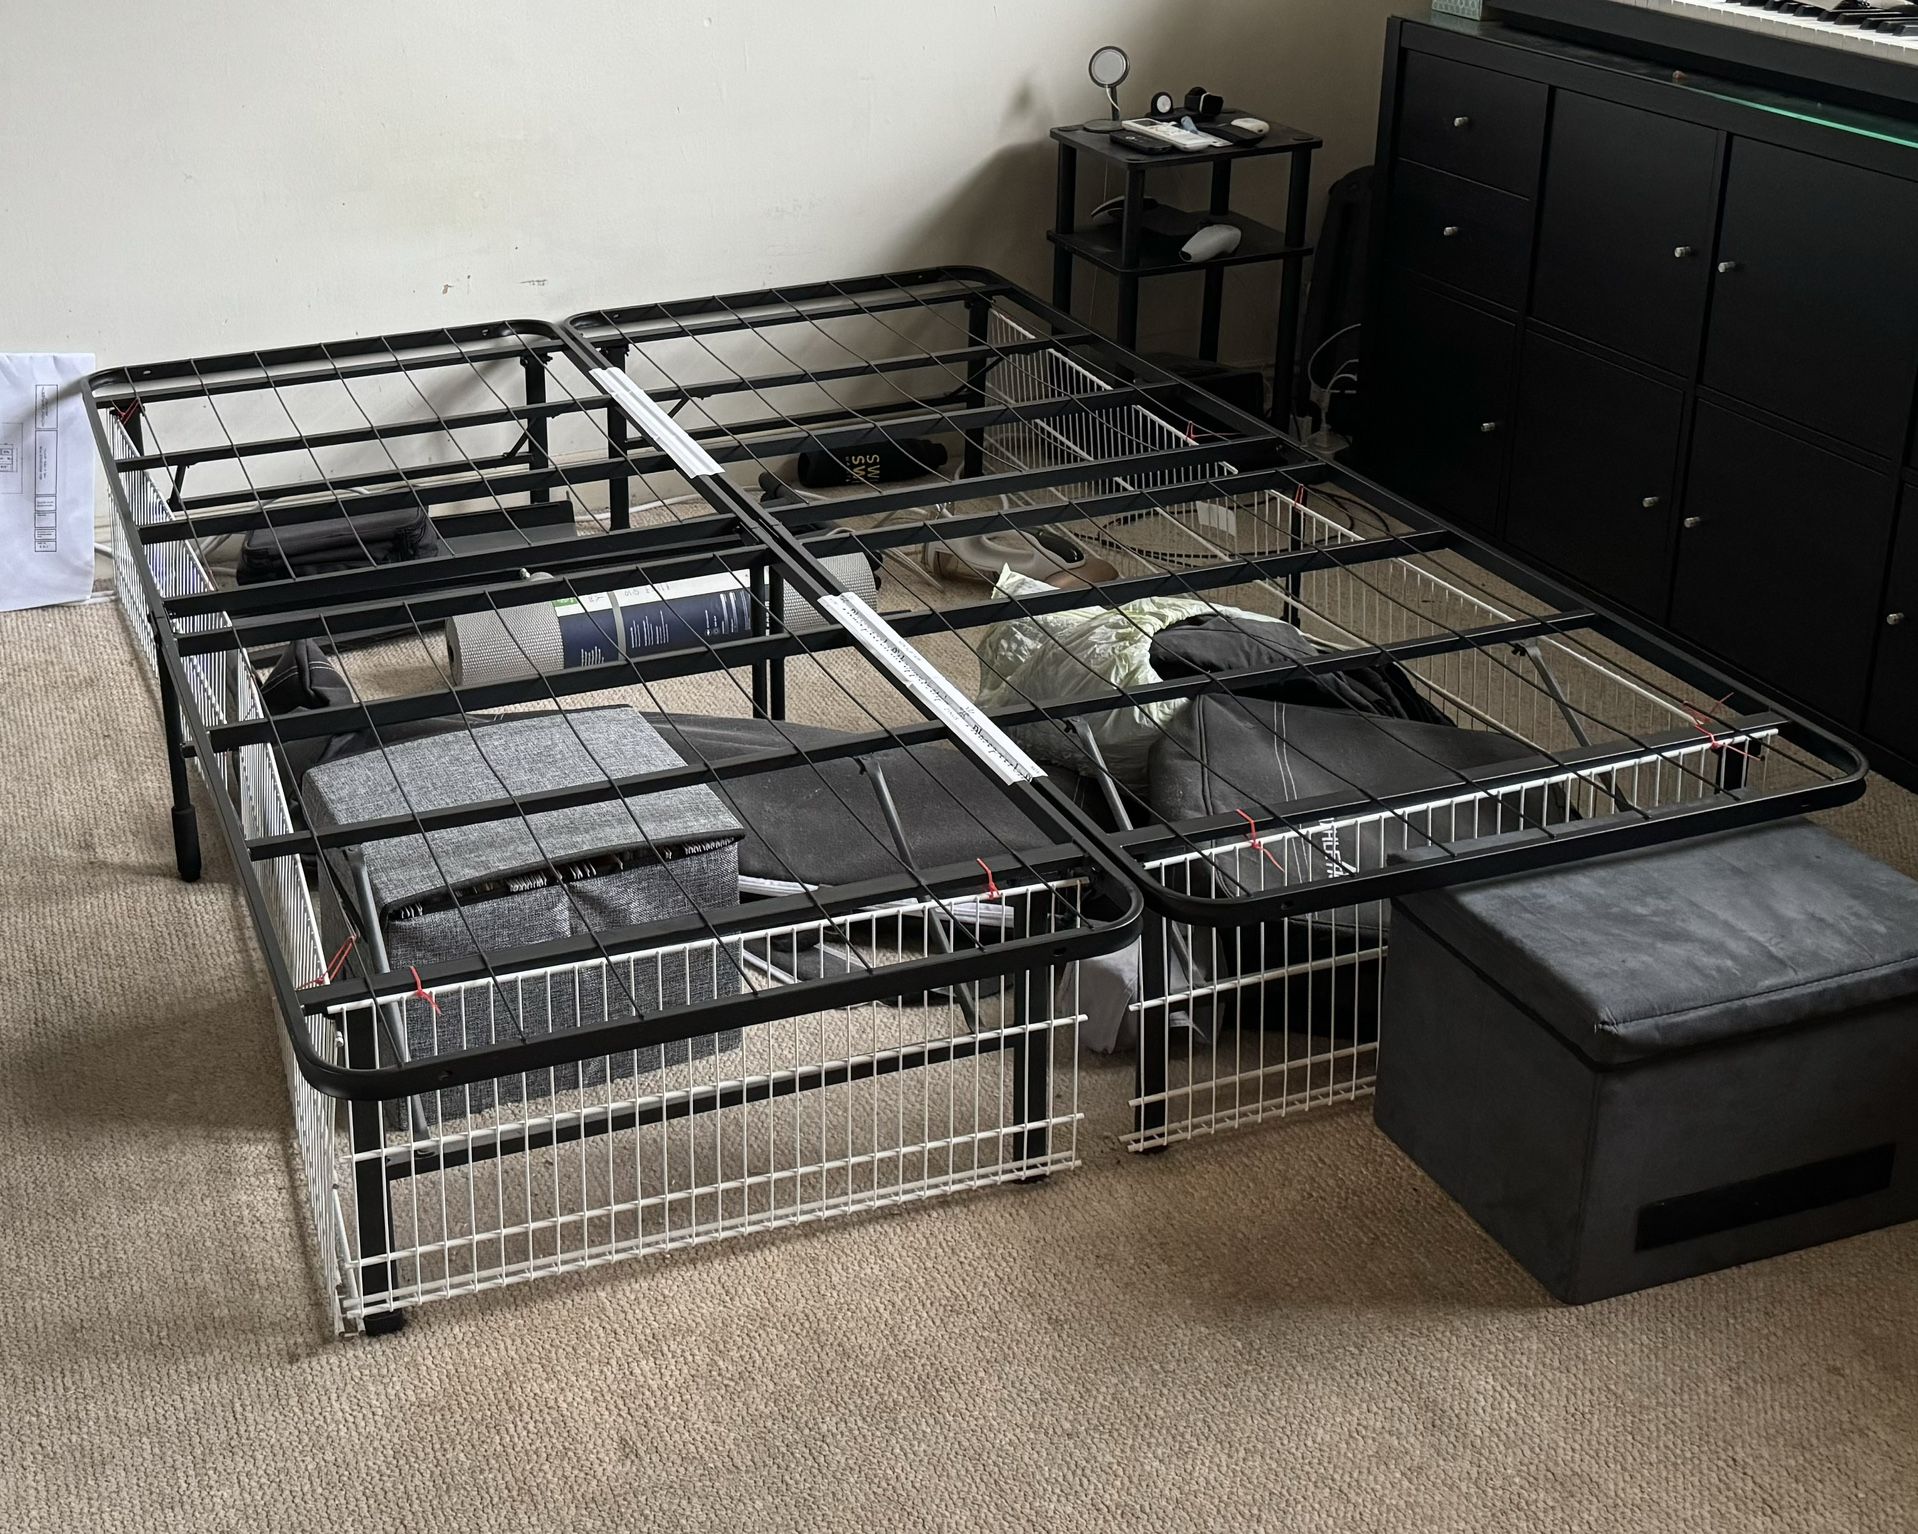 Queen Bed Frame With A Lot Of Storage Space